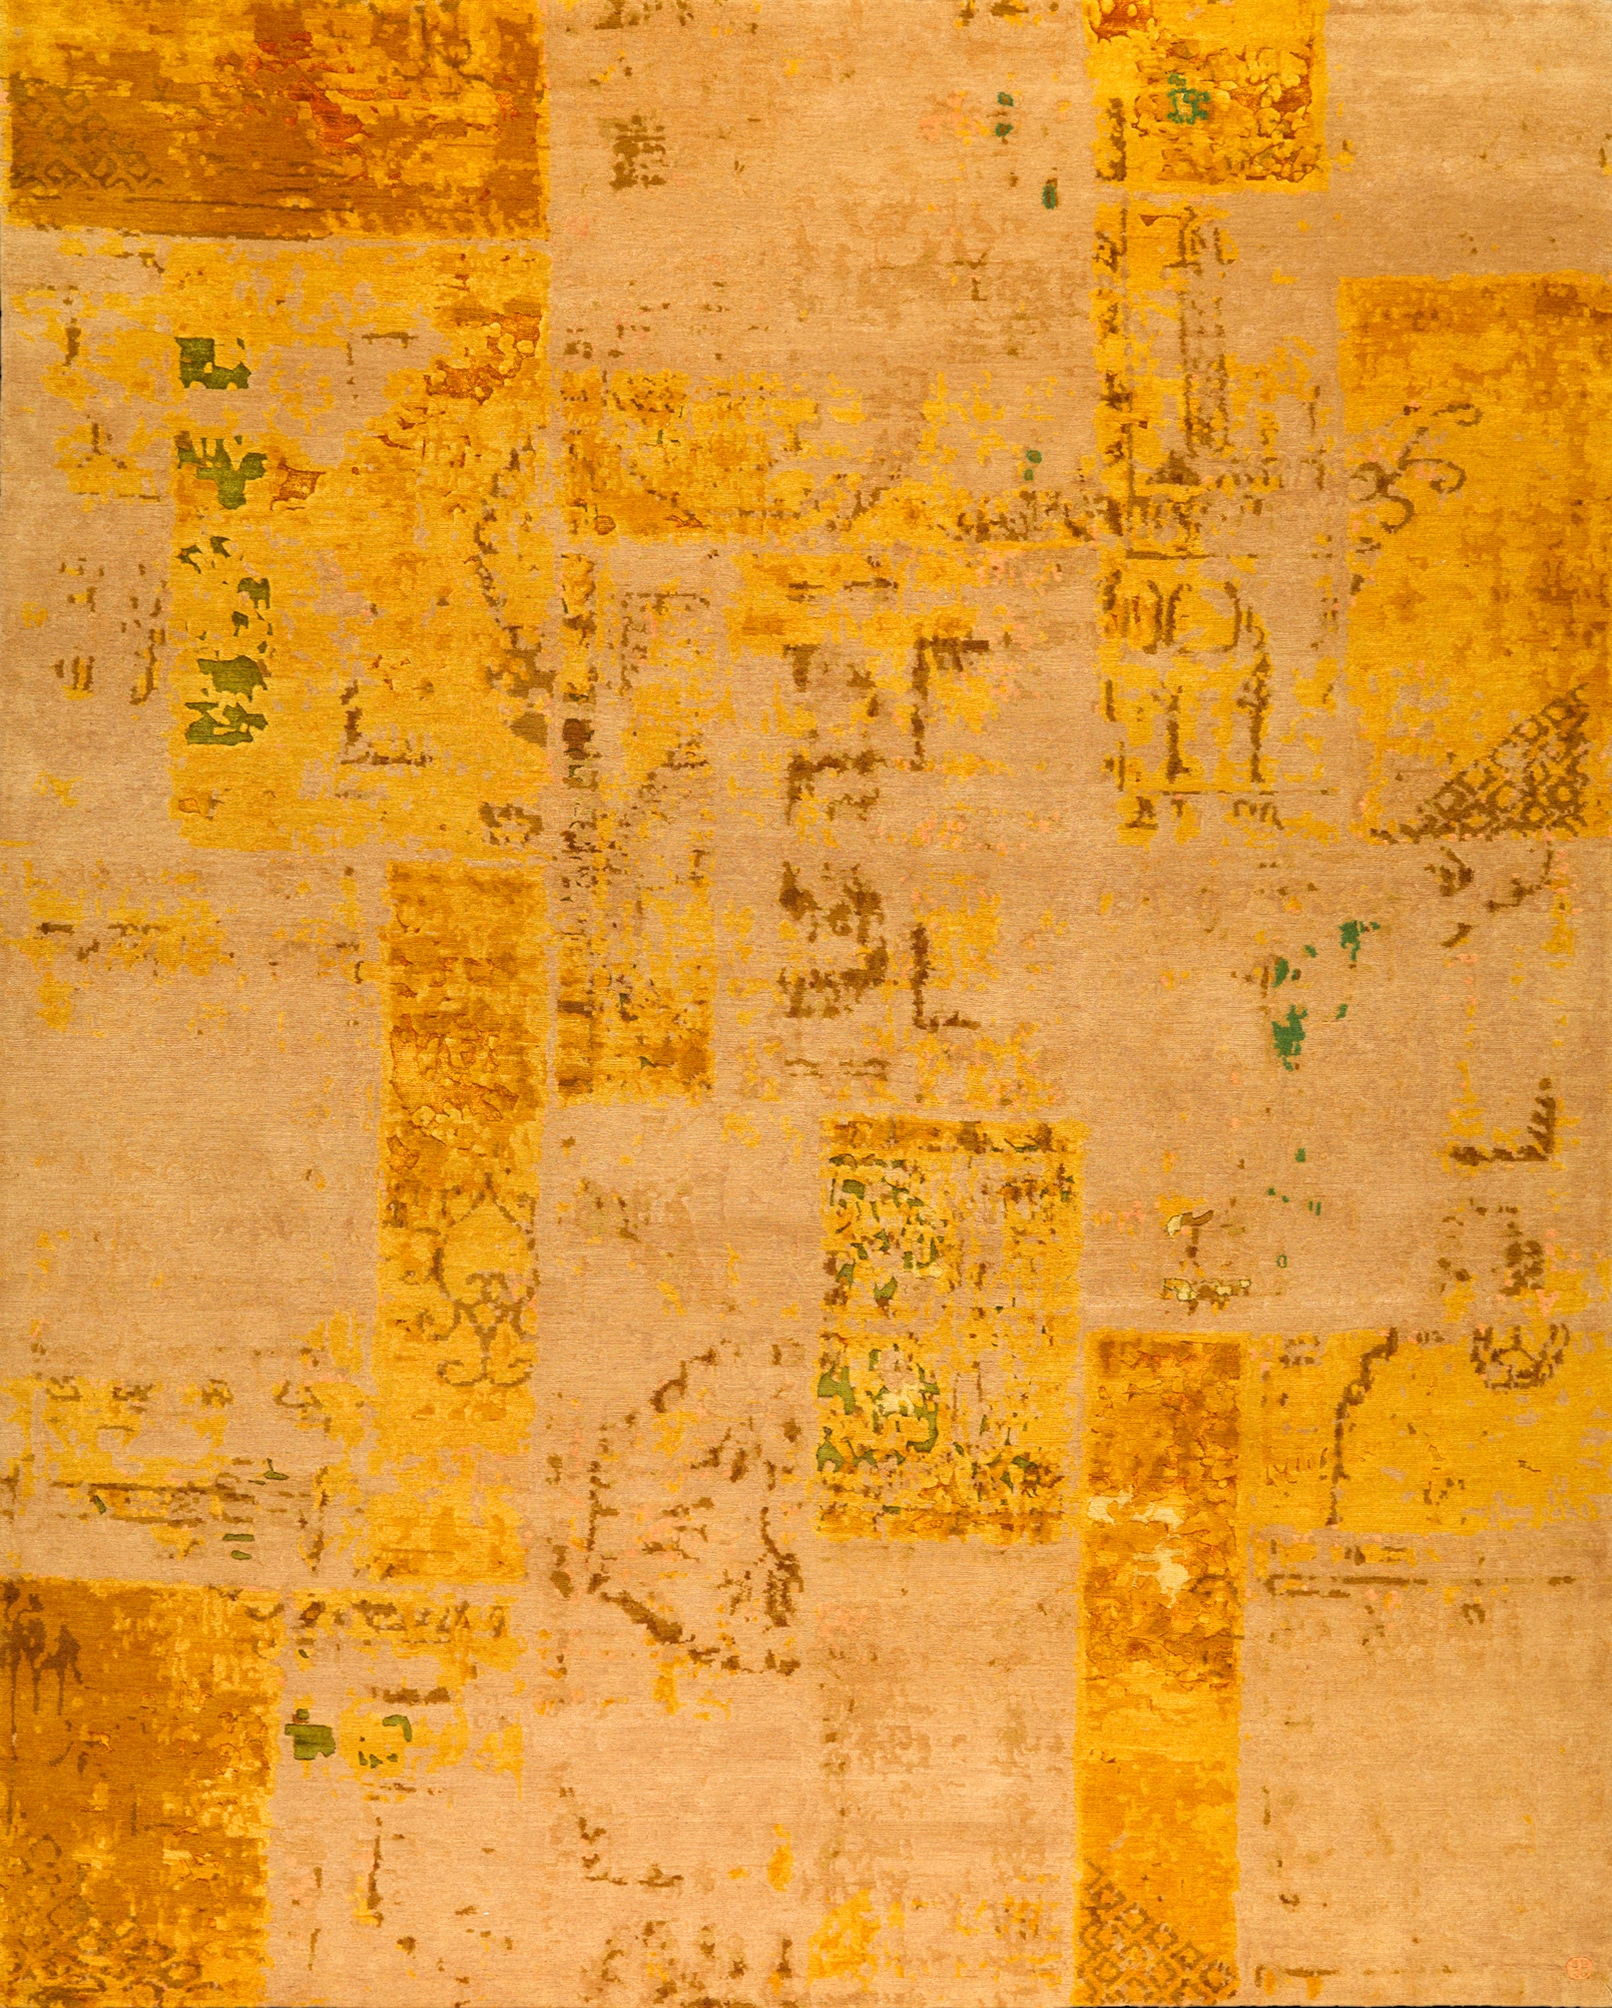 Geba carpet "PW yellow silk" in different shades of yellow, patchwork and vintage look, from Nepal, 100 knot, 90% sheep's wool and 10% chinese silk - product picture - Geba carpet